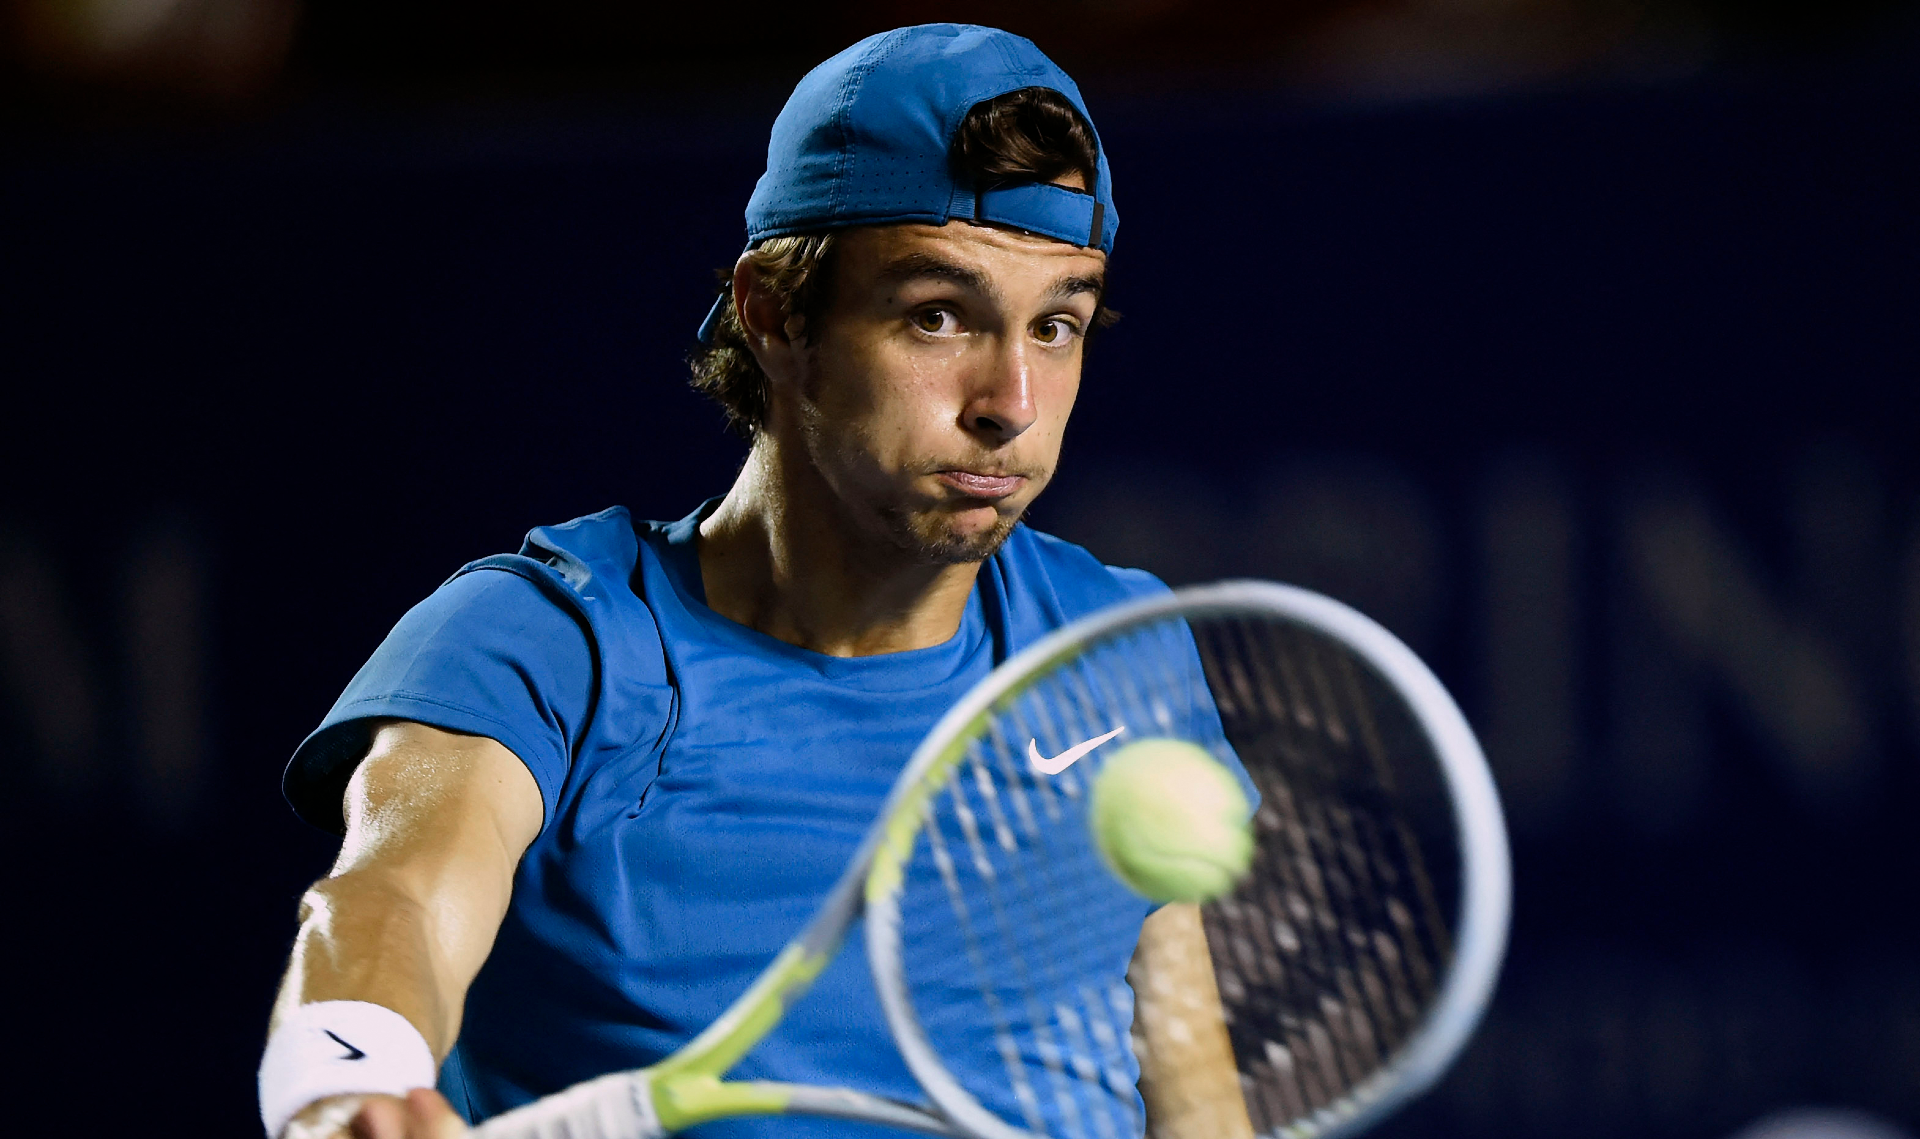 Emerging star Musetti wins in Miami Open debut beIN SPORTS